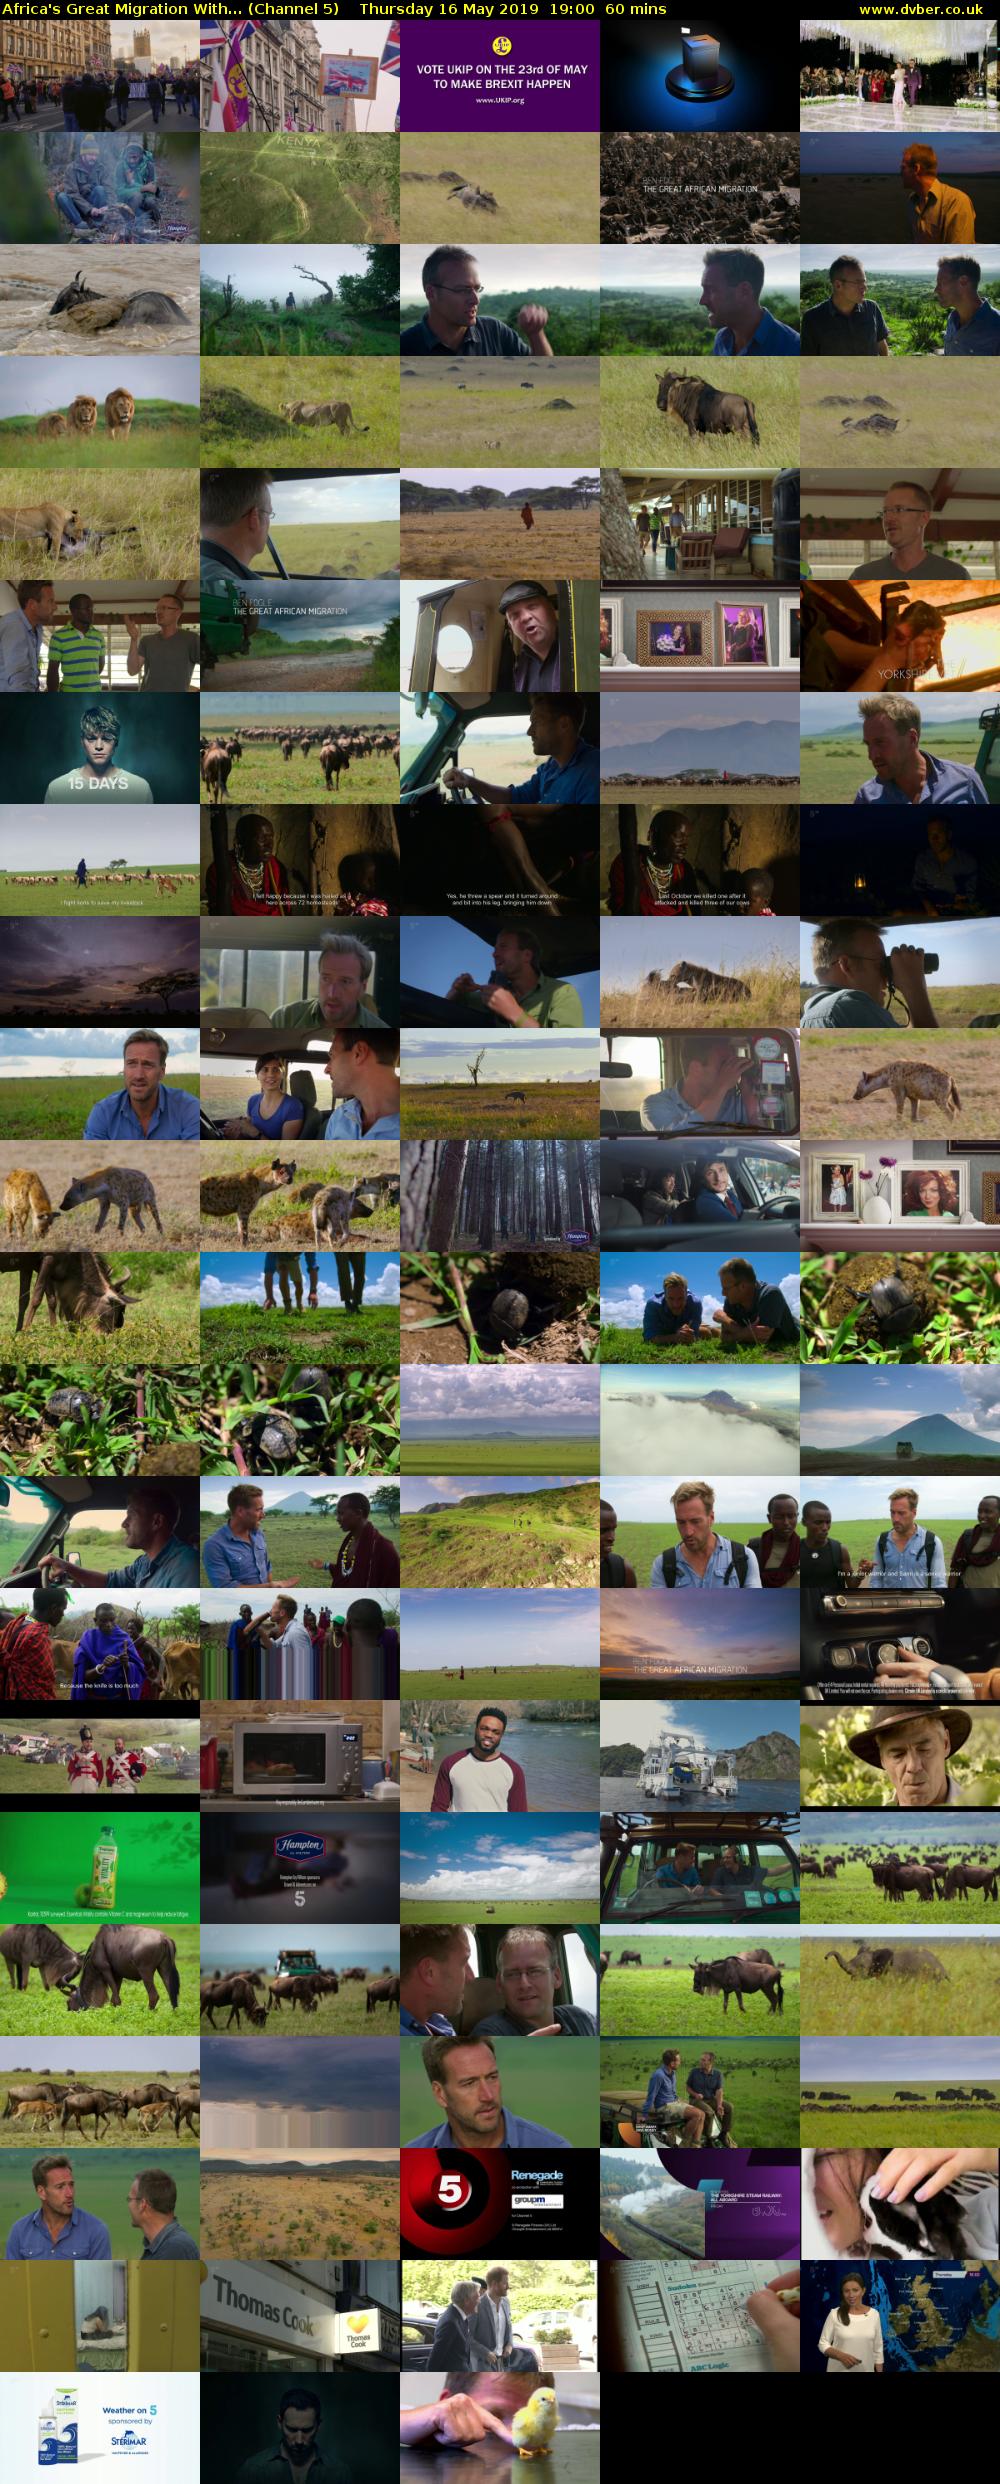 Africa's Great Migration With... (Channel 5) Thursday 16 May 2019 19:00 - 20:00